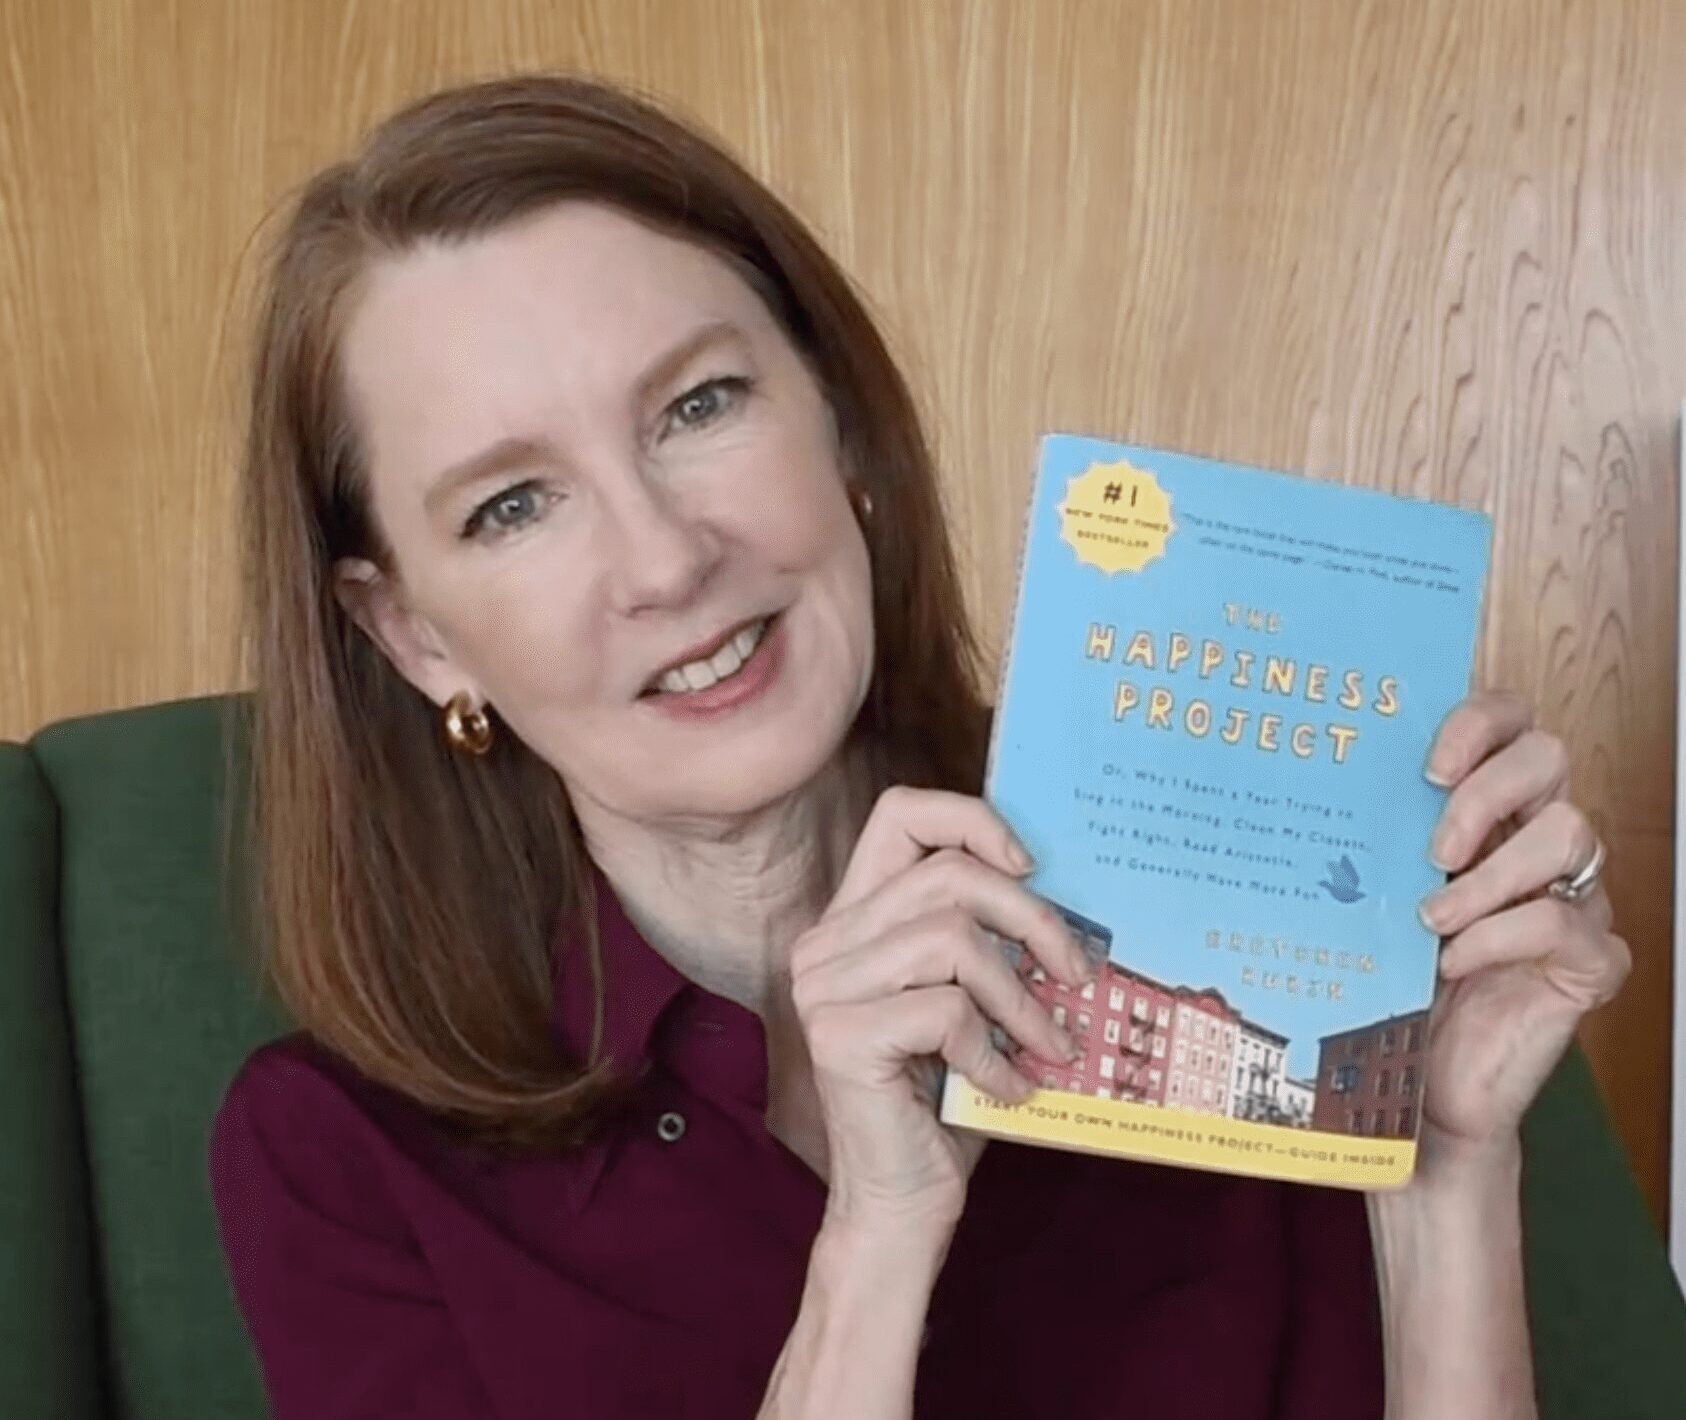 Gretchen Rubin - For my research on my book about the body